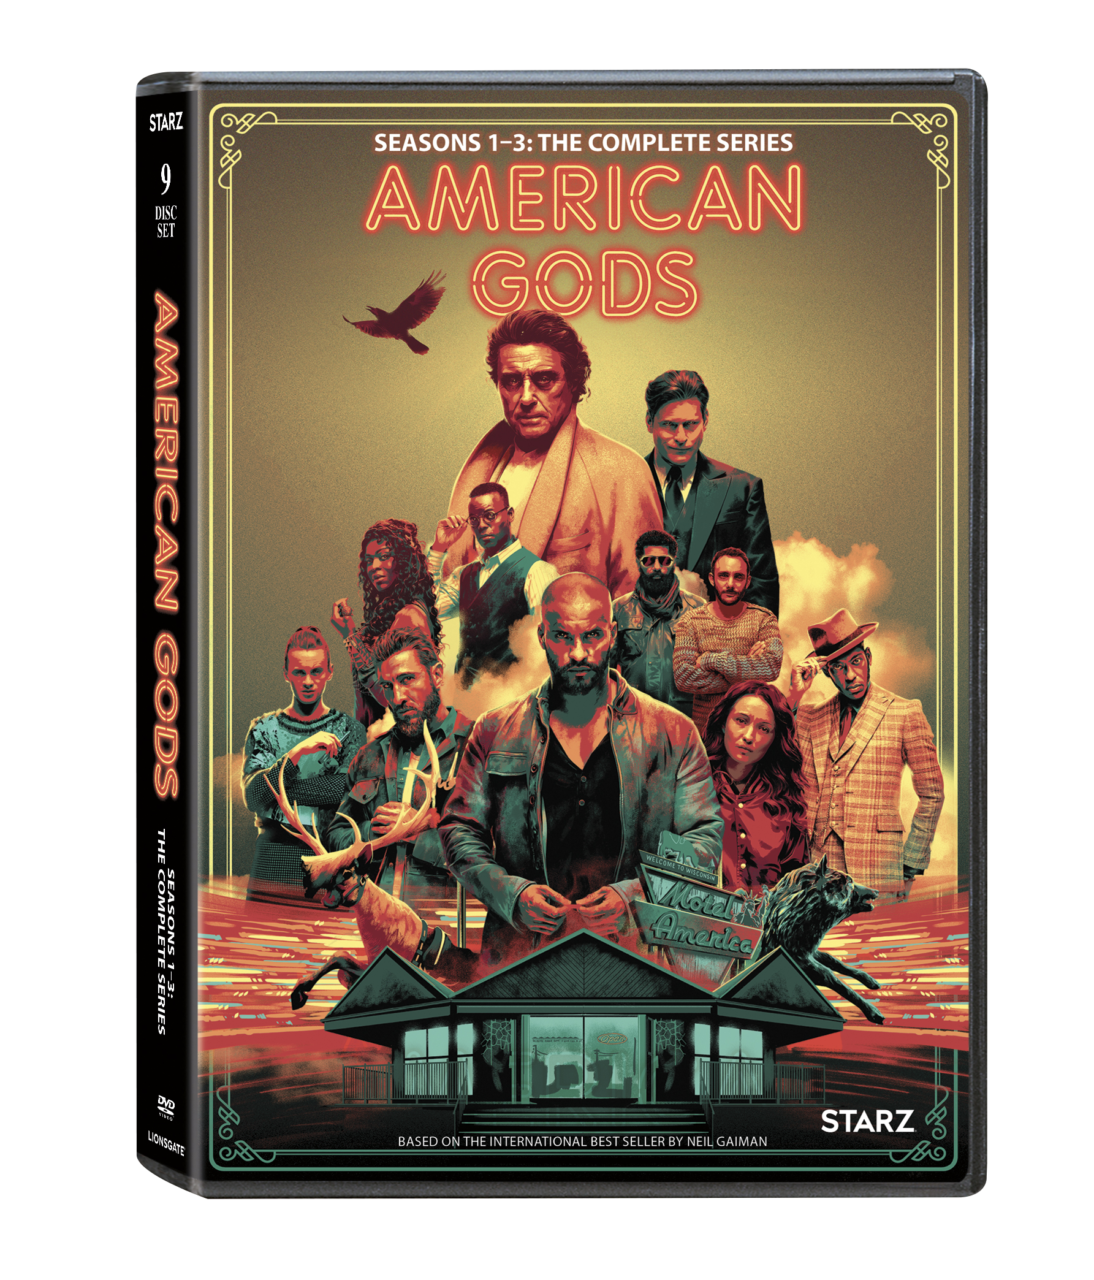 American Gods - Season 1-3: The Complete Series DVD cover (Lionsgate)